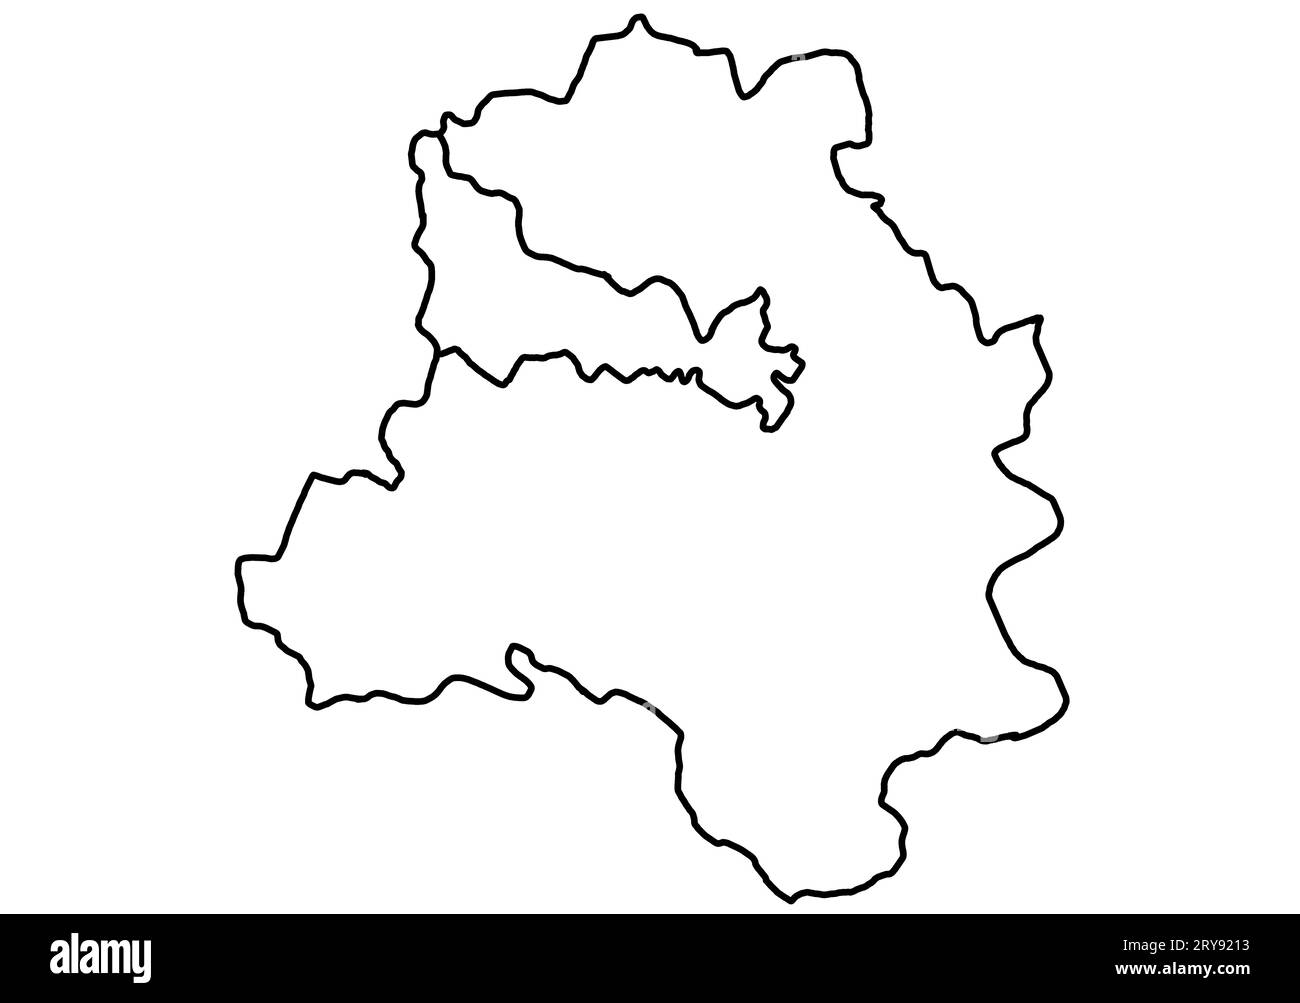 North West Delhi, India Map Black Silhouette and Outline Isolated on White. Stock Photo